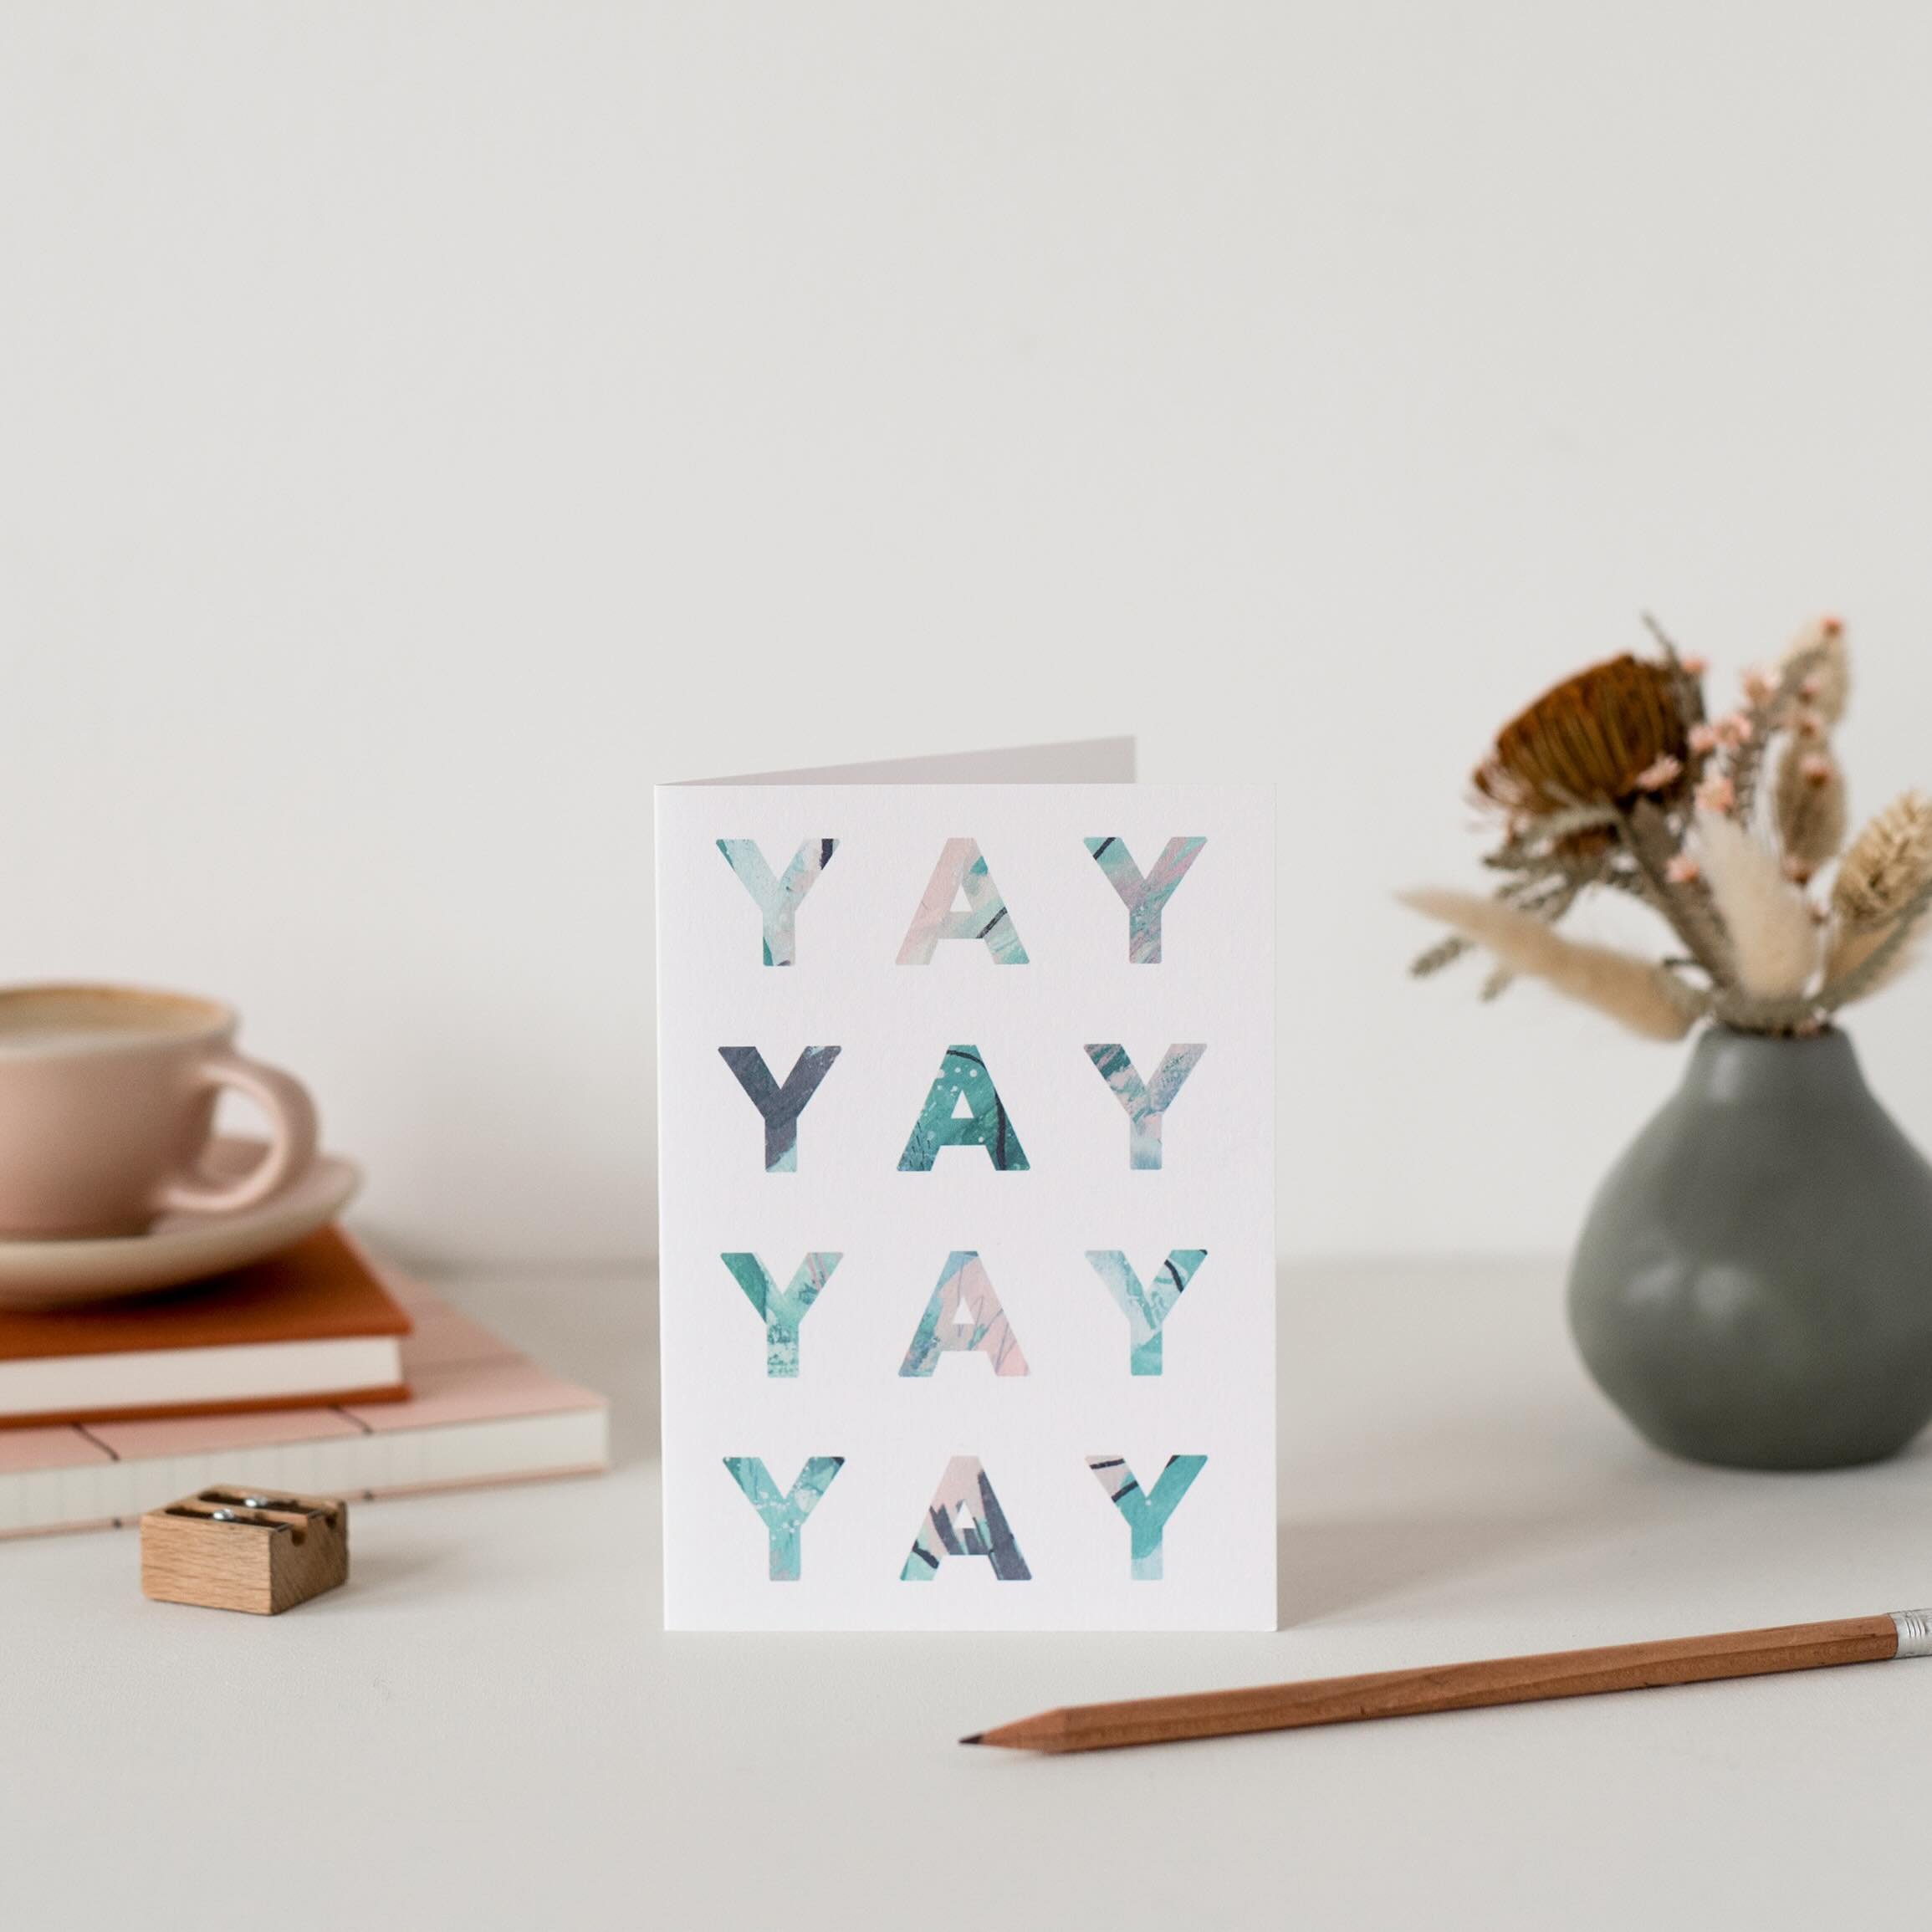 Today&rsquo;s mood is YAY because I&rsquo;m going to see Wicked tonight! Can&rsquo;t waaaait!!

#Greetingcards #papergoods #cardshop #greetingcard #shopsmall #leedsartist #mixedmediaartist #celebrationcard